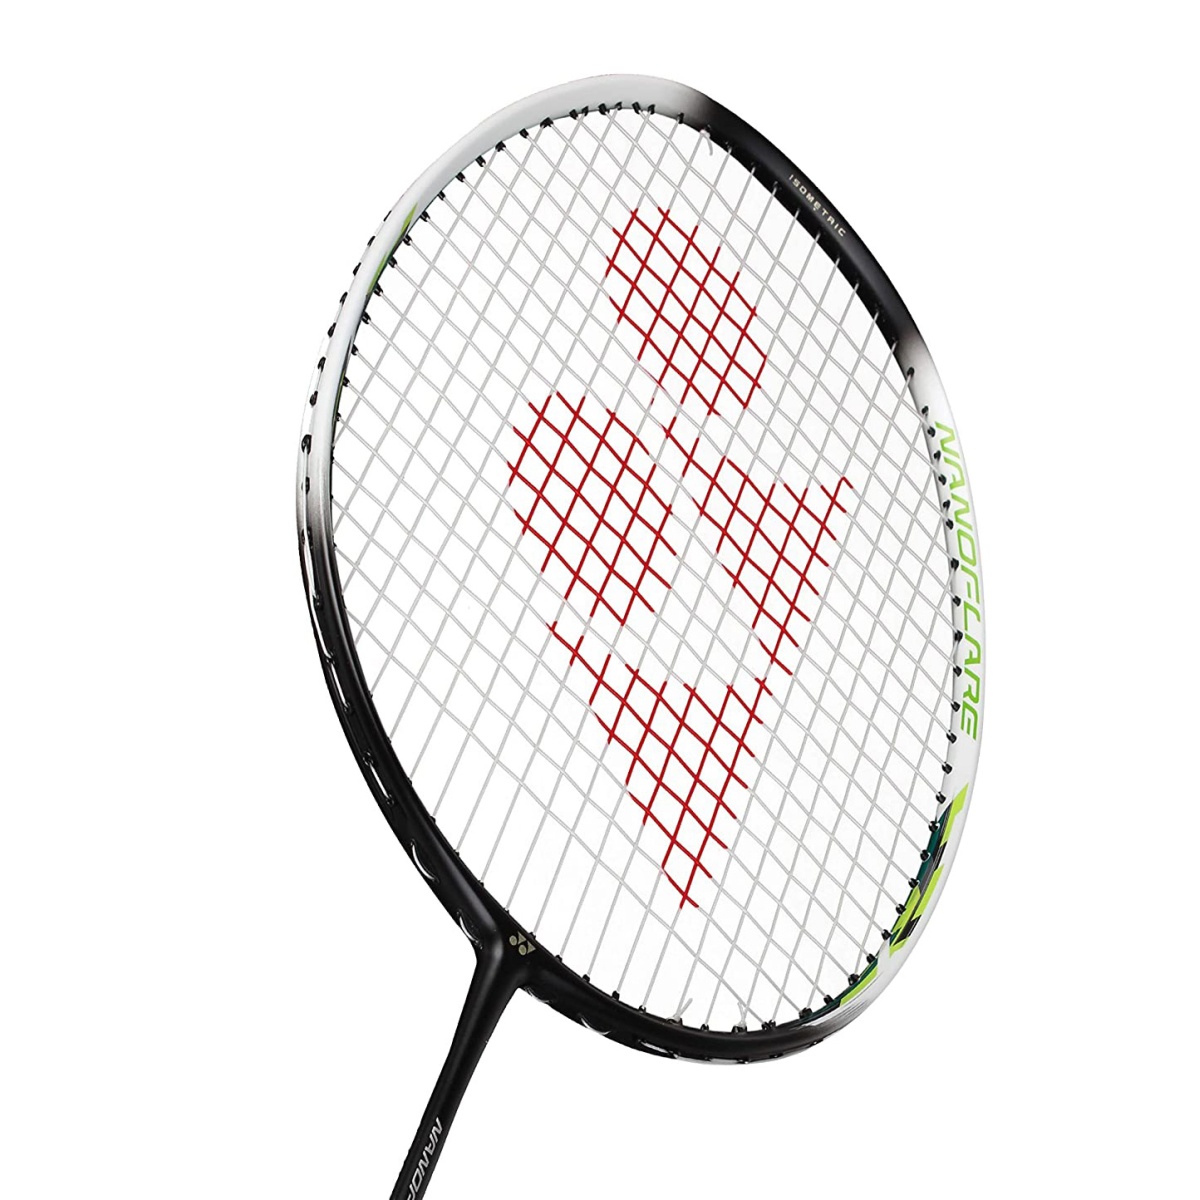 Details about   Yonex NANOFLARE 170 LT Badminton Racquet White Red Racket 5UG5 with Cover 